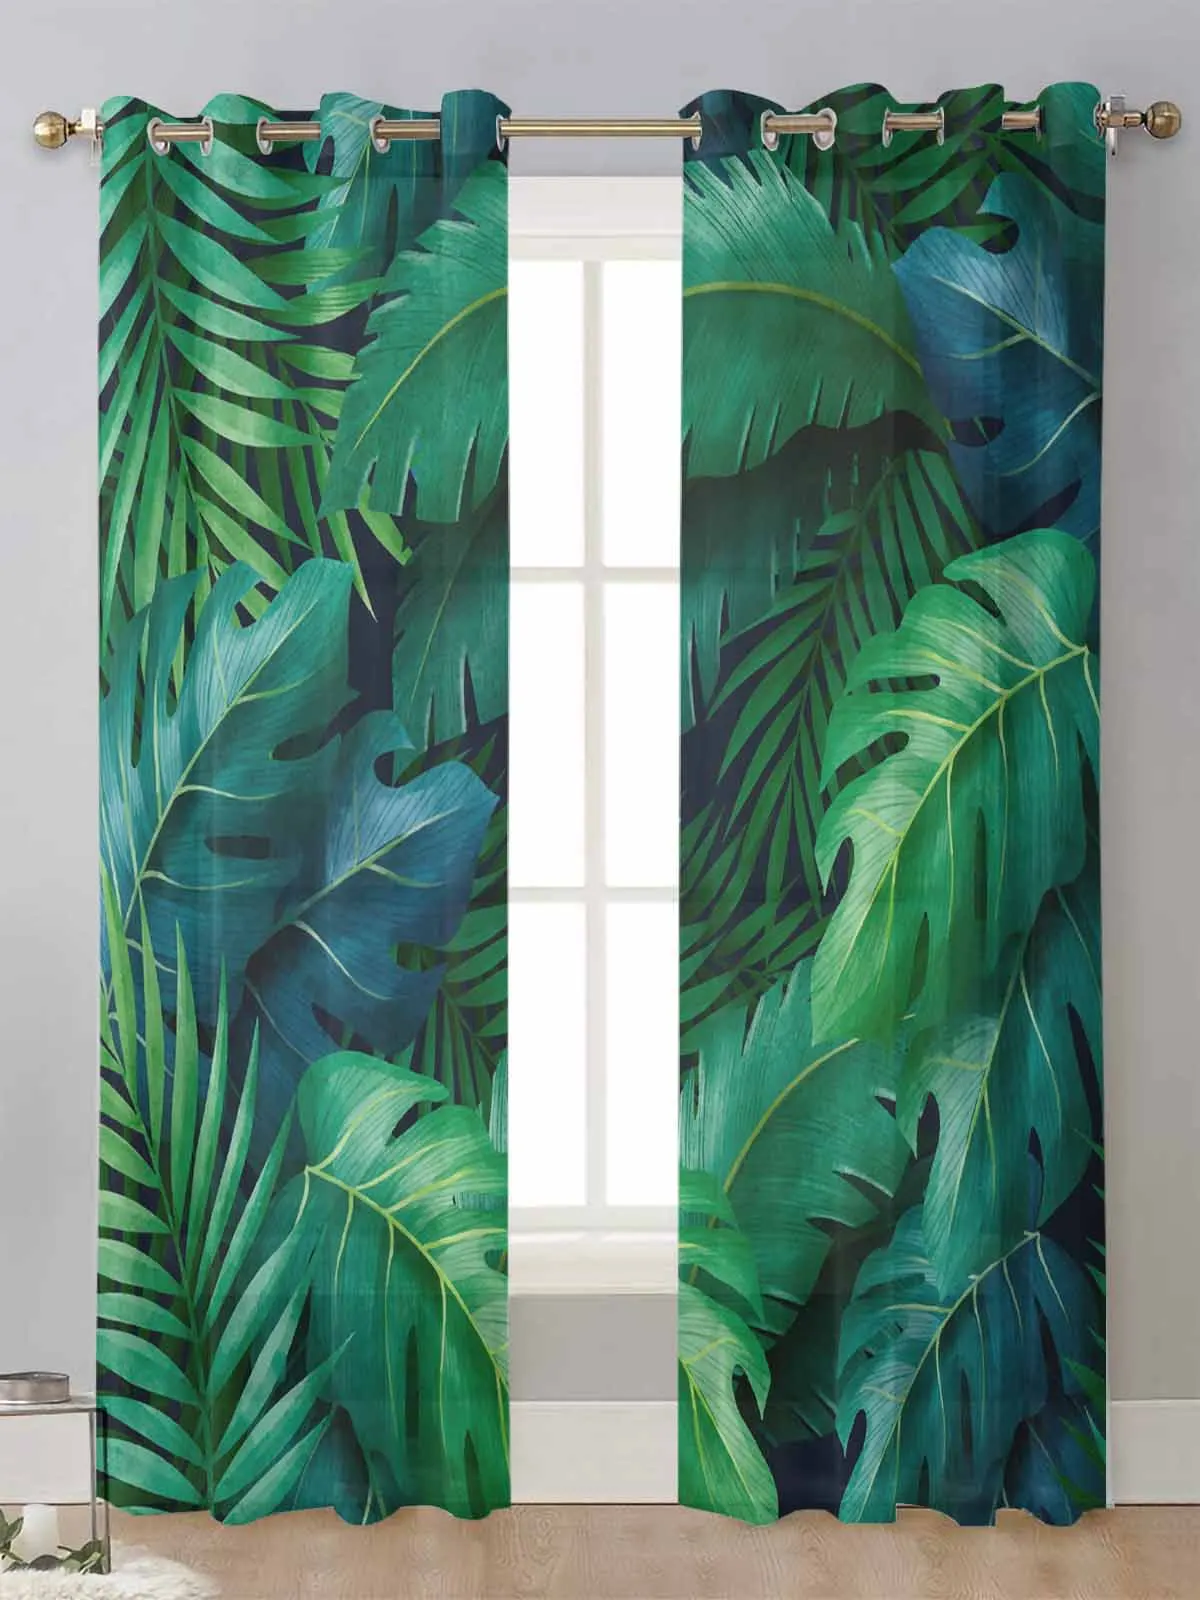 

Green Leaves Plants Tropical Jungle Sheer Curtains For Living Room Window Voile Tulle Curtain Cortinas Drapes Home Decor